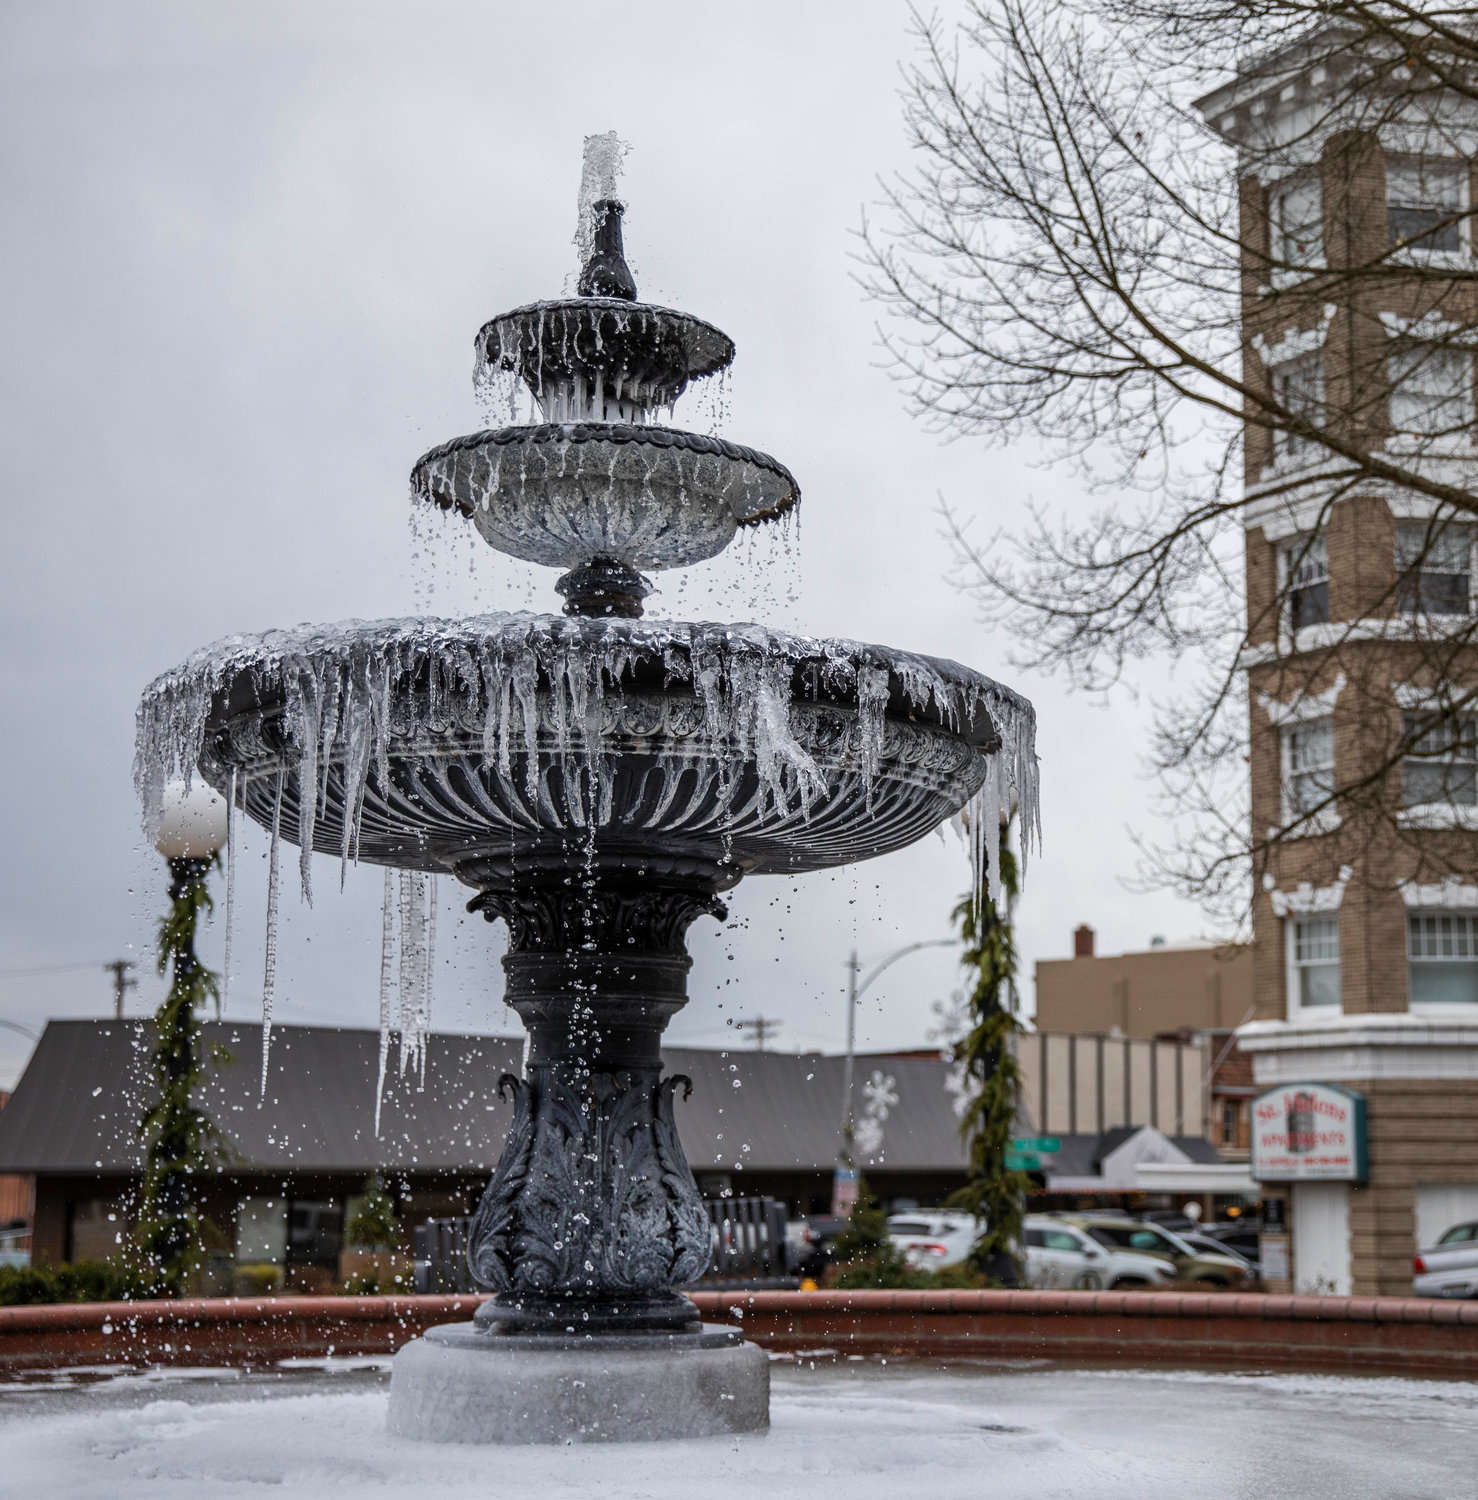 Water continues to fall as icicles form on the fountain outside the Vernetta Smith Chehalis Timberland Library on Thursday.